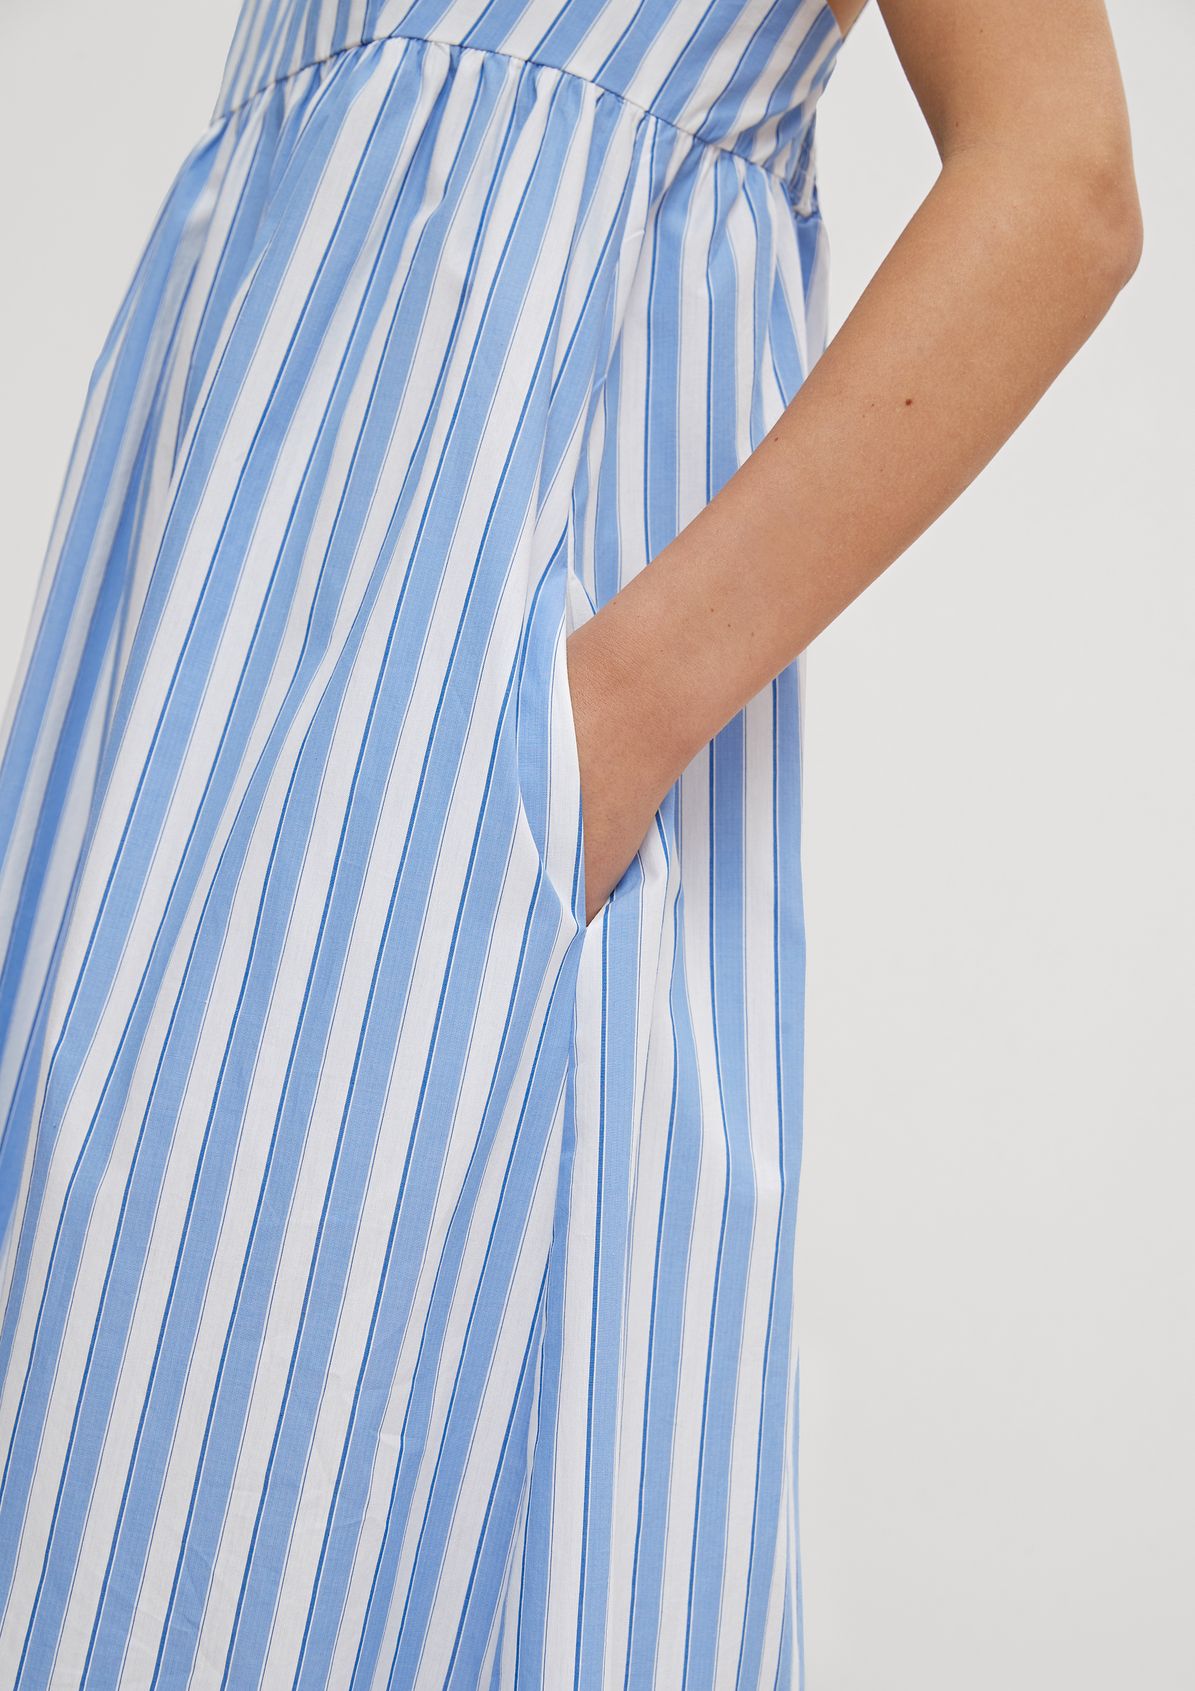 Cotton dress with stripes from comma